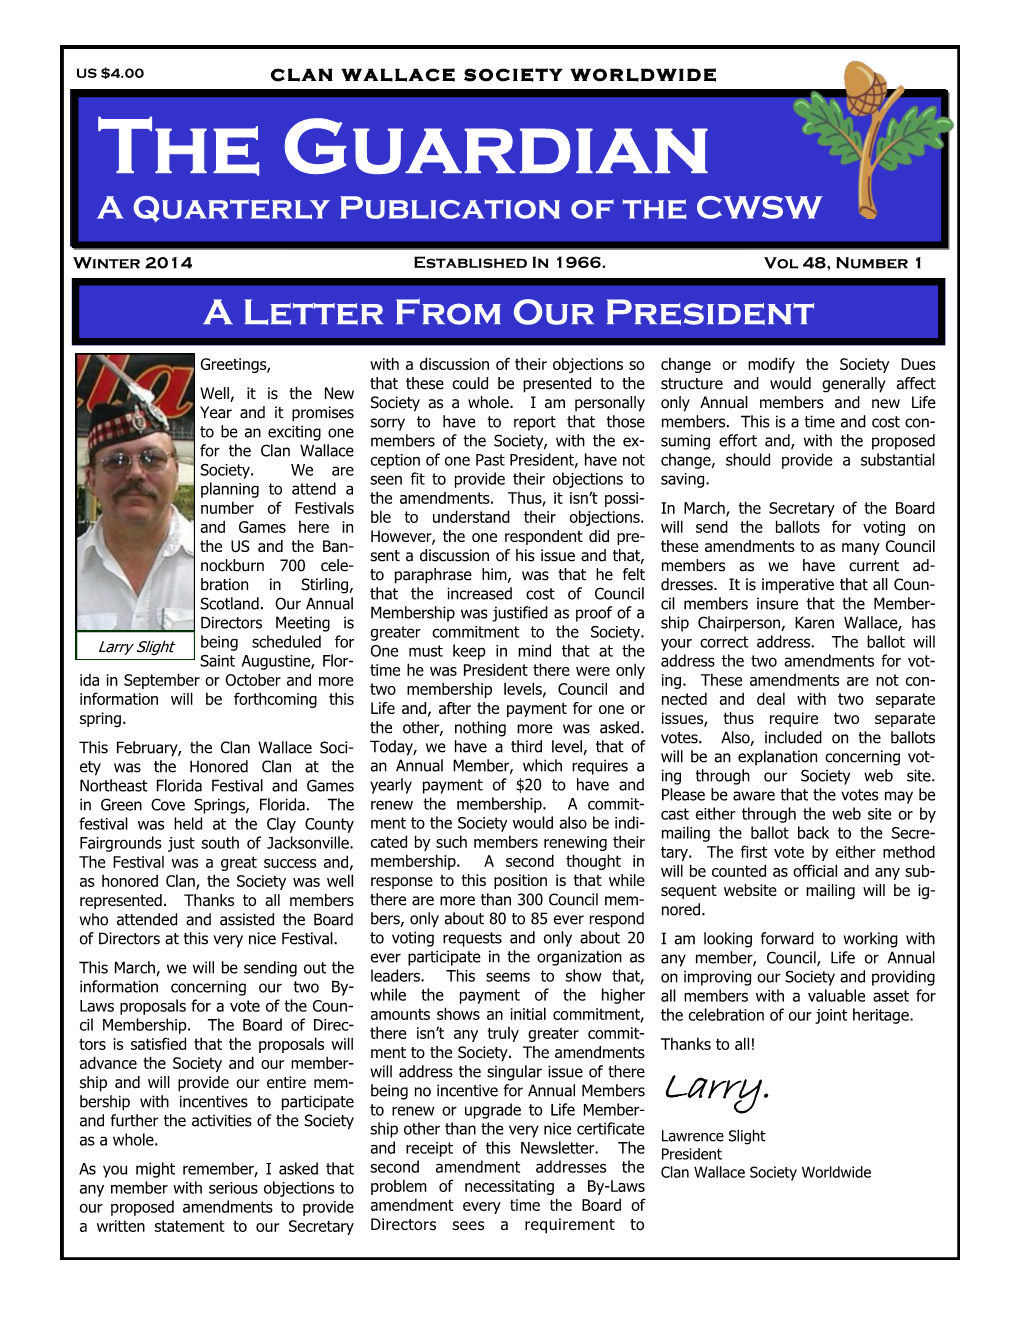 The Guardian a Quarterly Publication of the CWSW